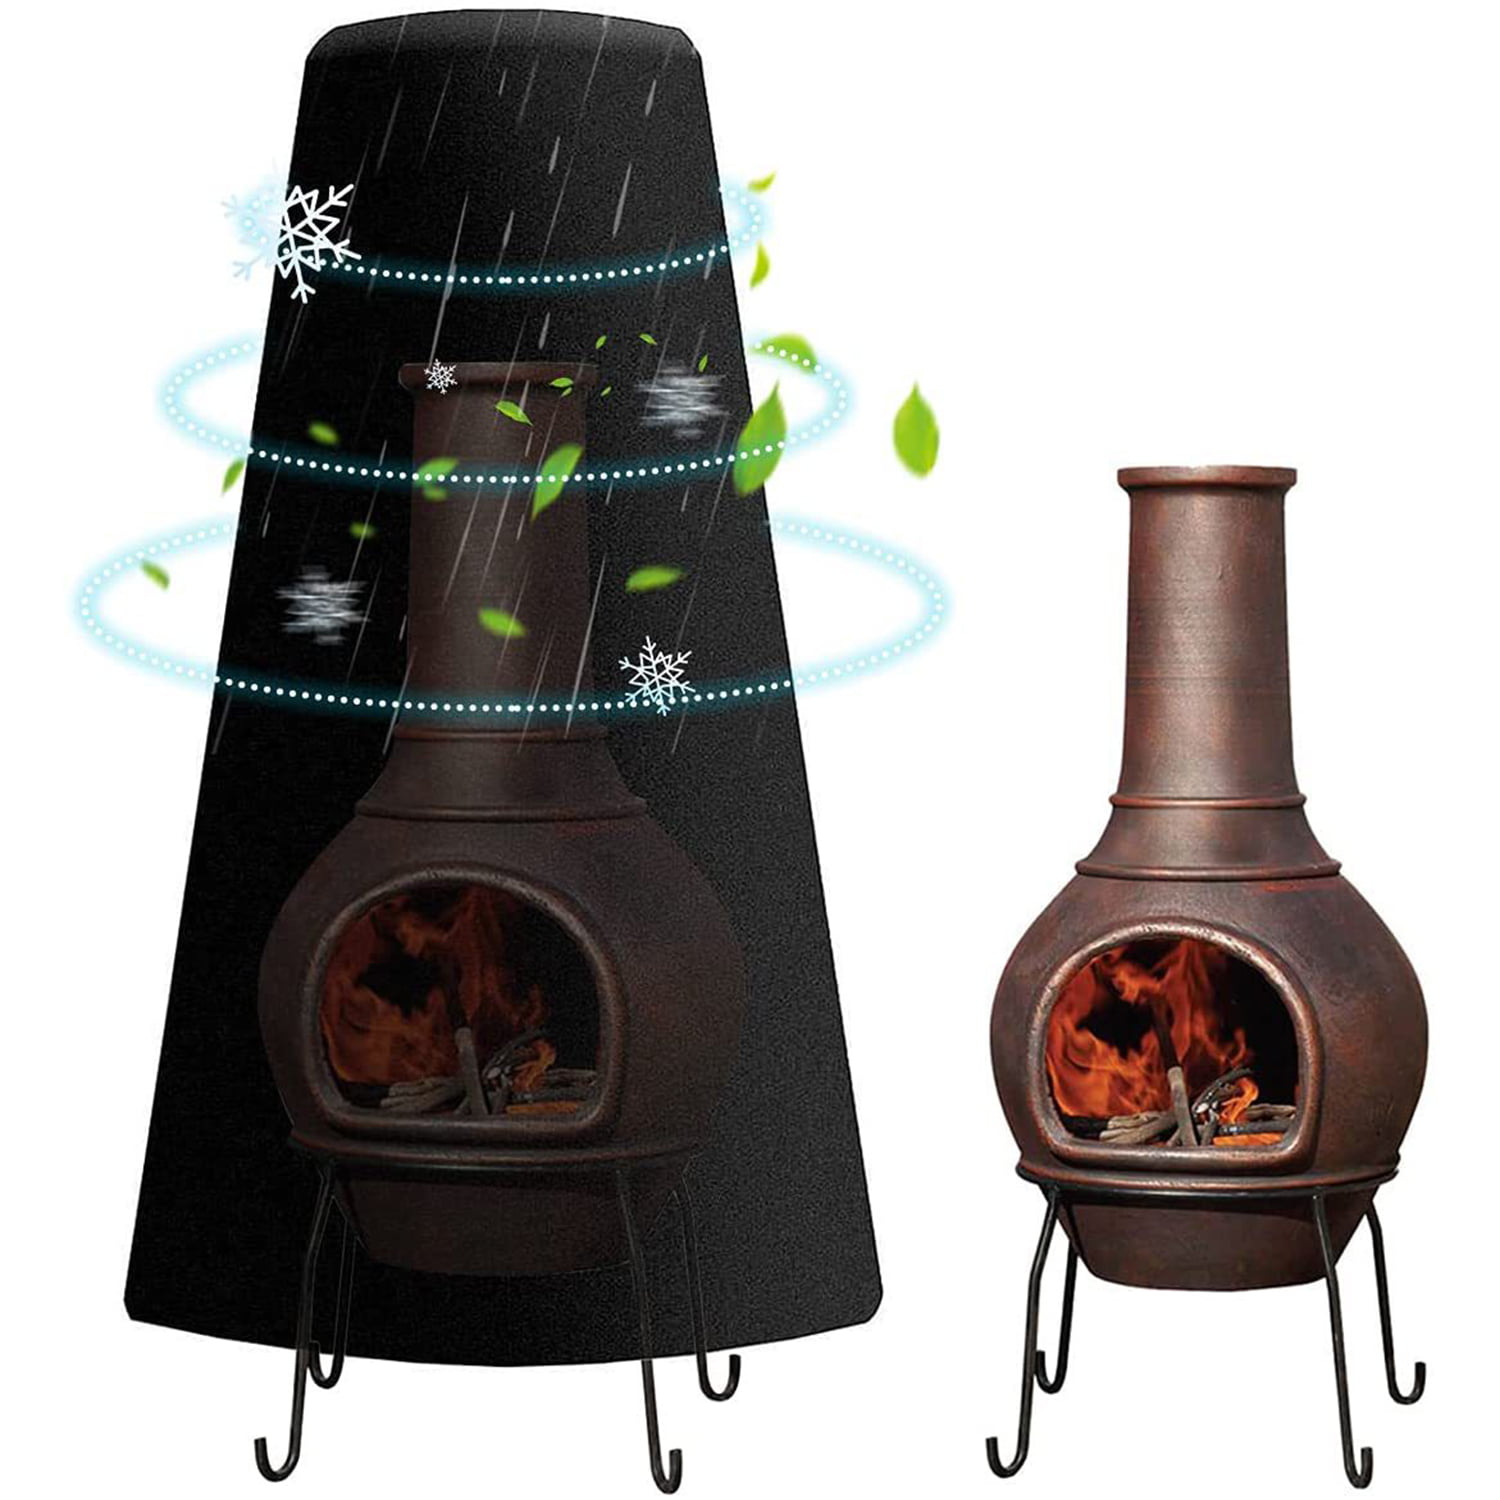 New Chiminea Cover Waterproof Durable Tear & Rip Resistant Polyethylene Cover 